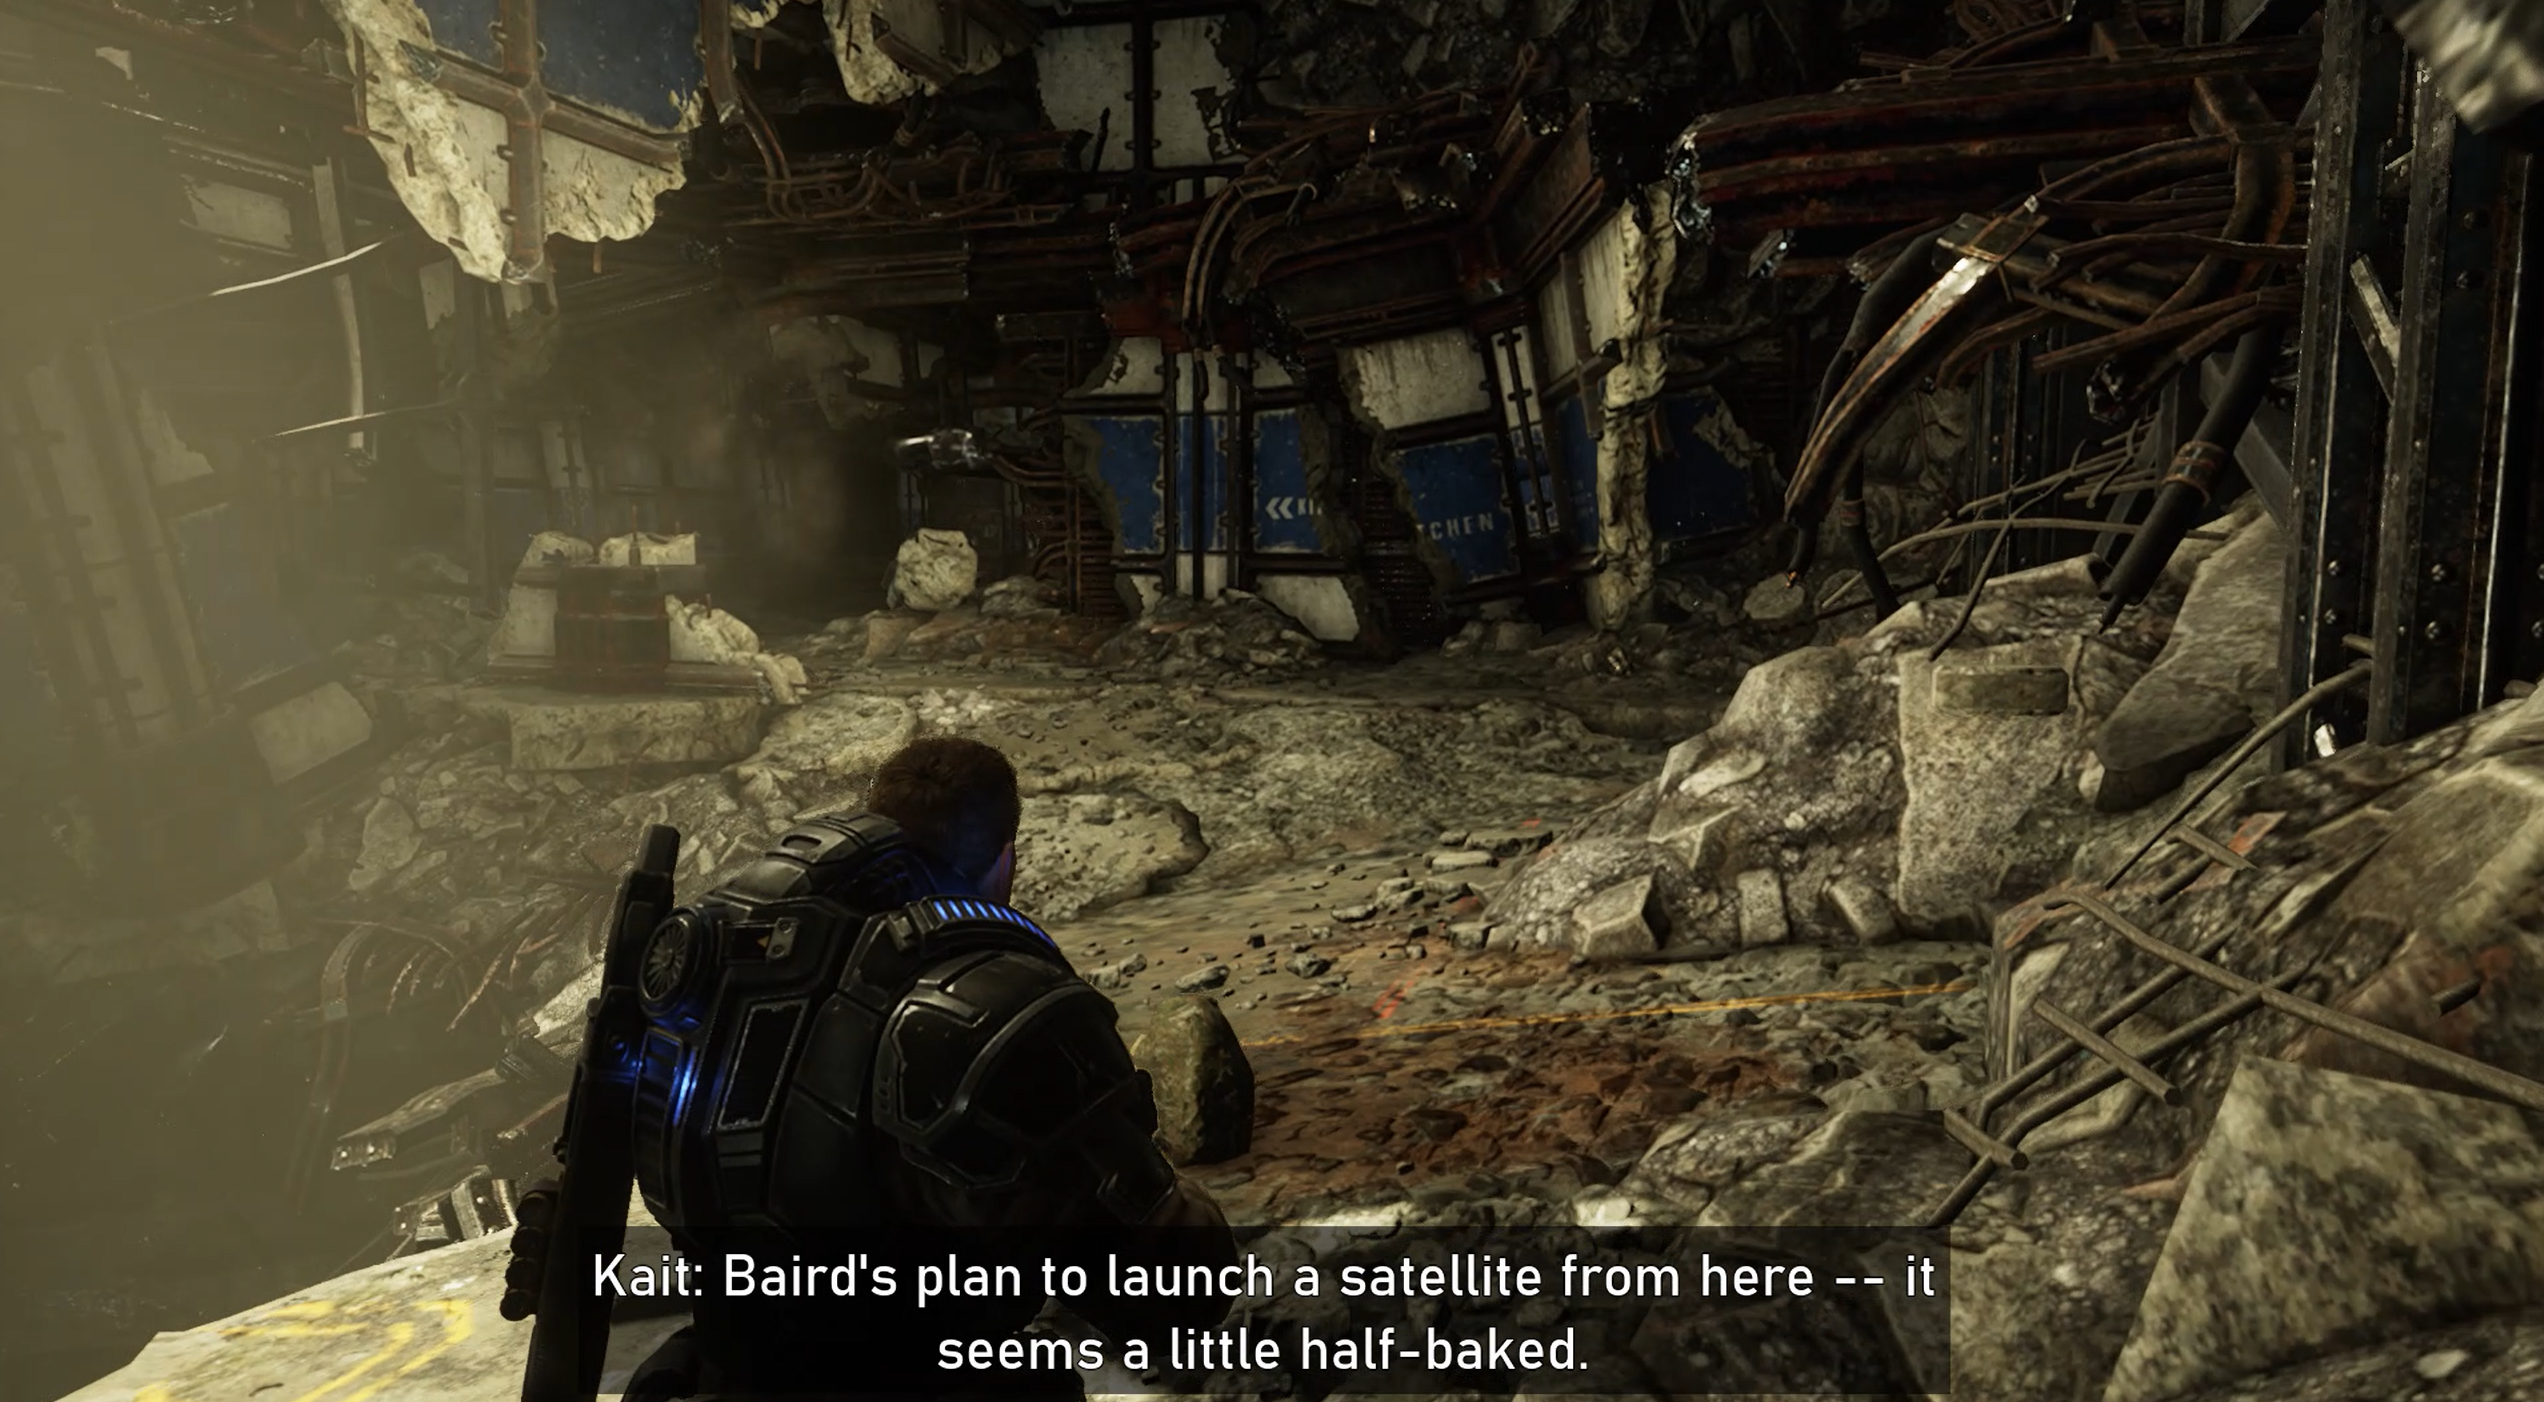 Subtitle with large text over a semi-opaque background during active gameplay in Gears 5 that reads, "Kait: Baird's plan to launch a satellite from here -- it seems a little half-baked."